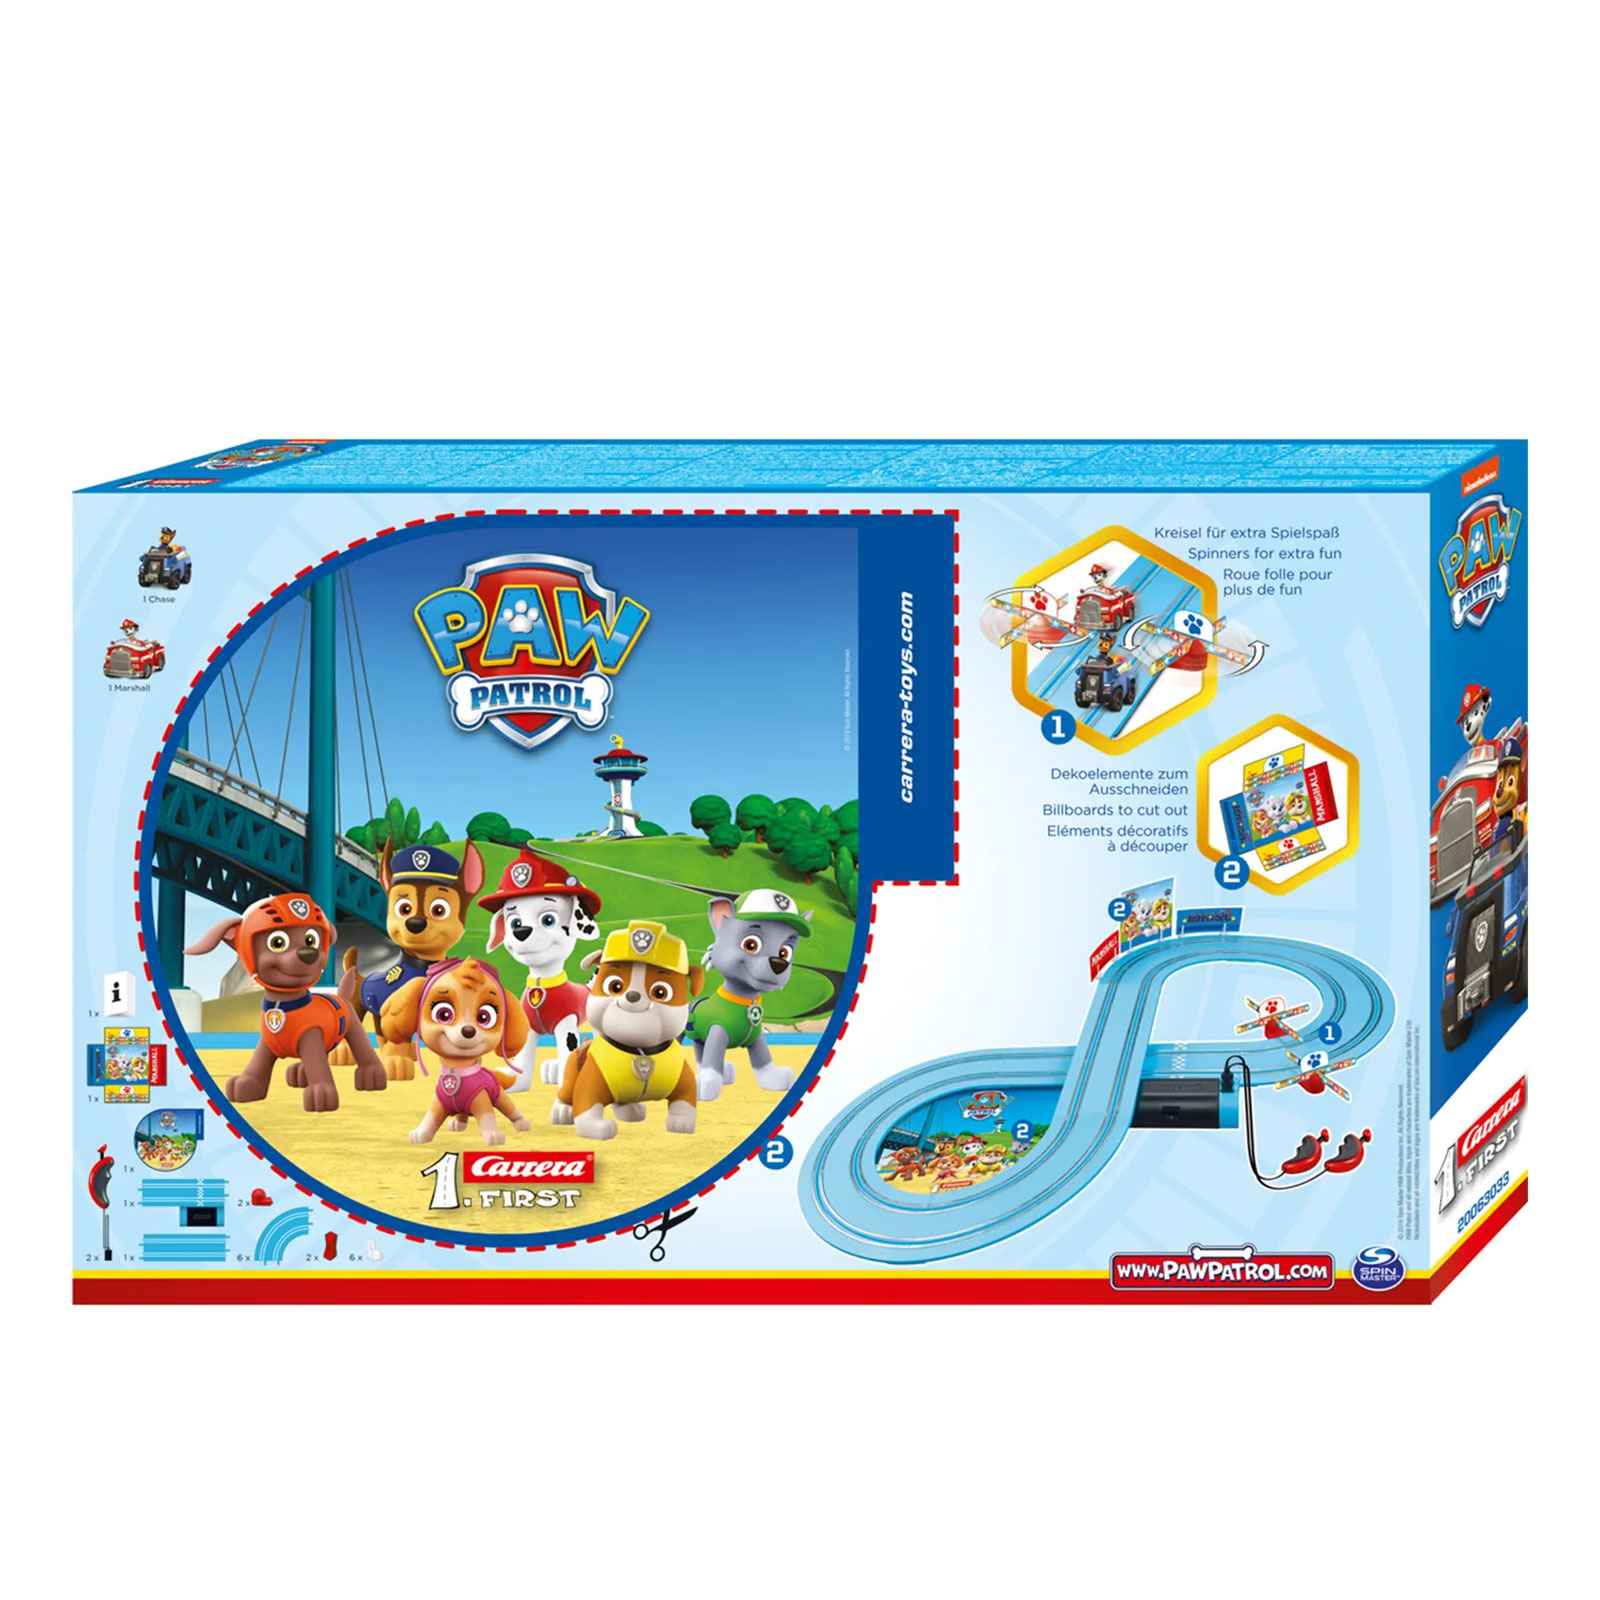 Carrera FIRST PAW PATROL - On the Track / 2.4m - Buy online now